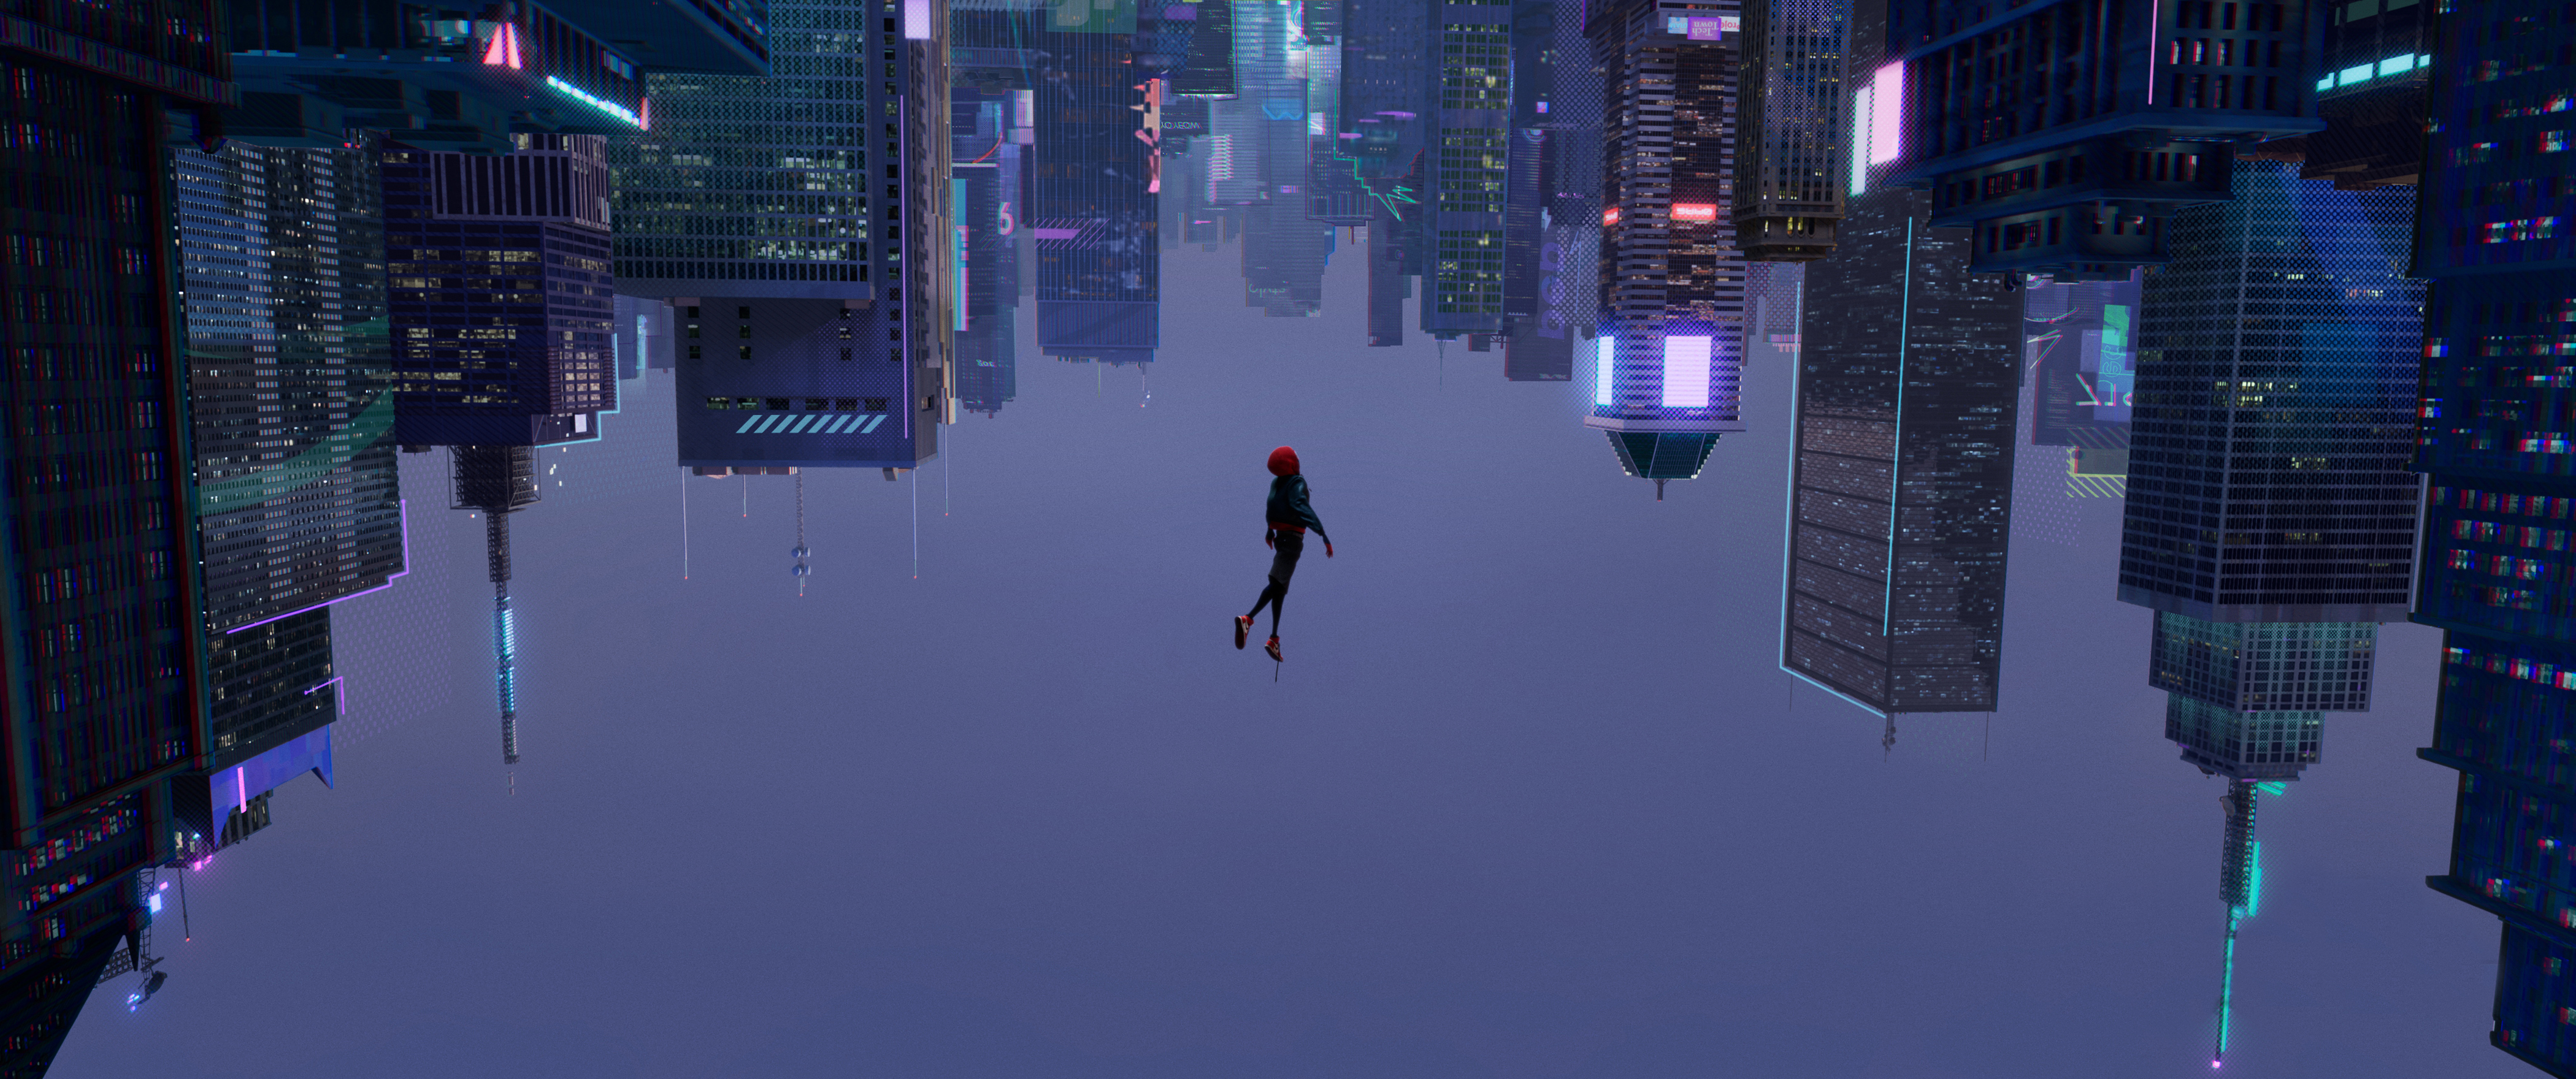 spider man, spider man: into the spider verse, miles morales, movie images